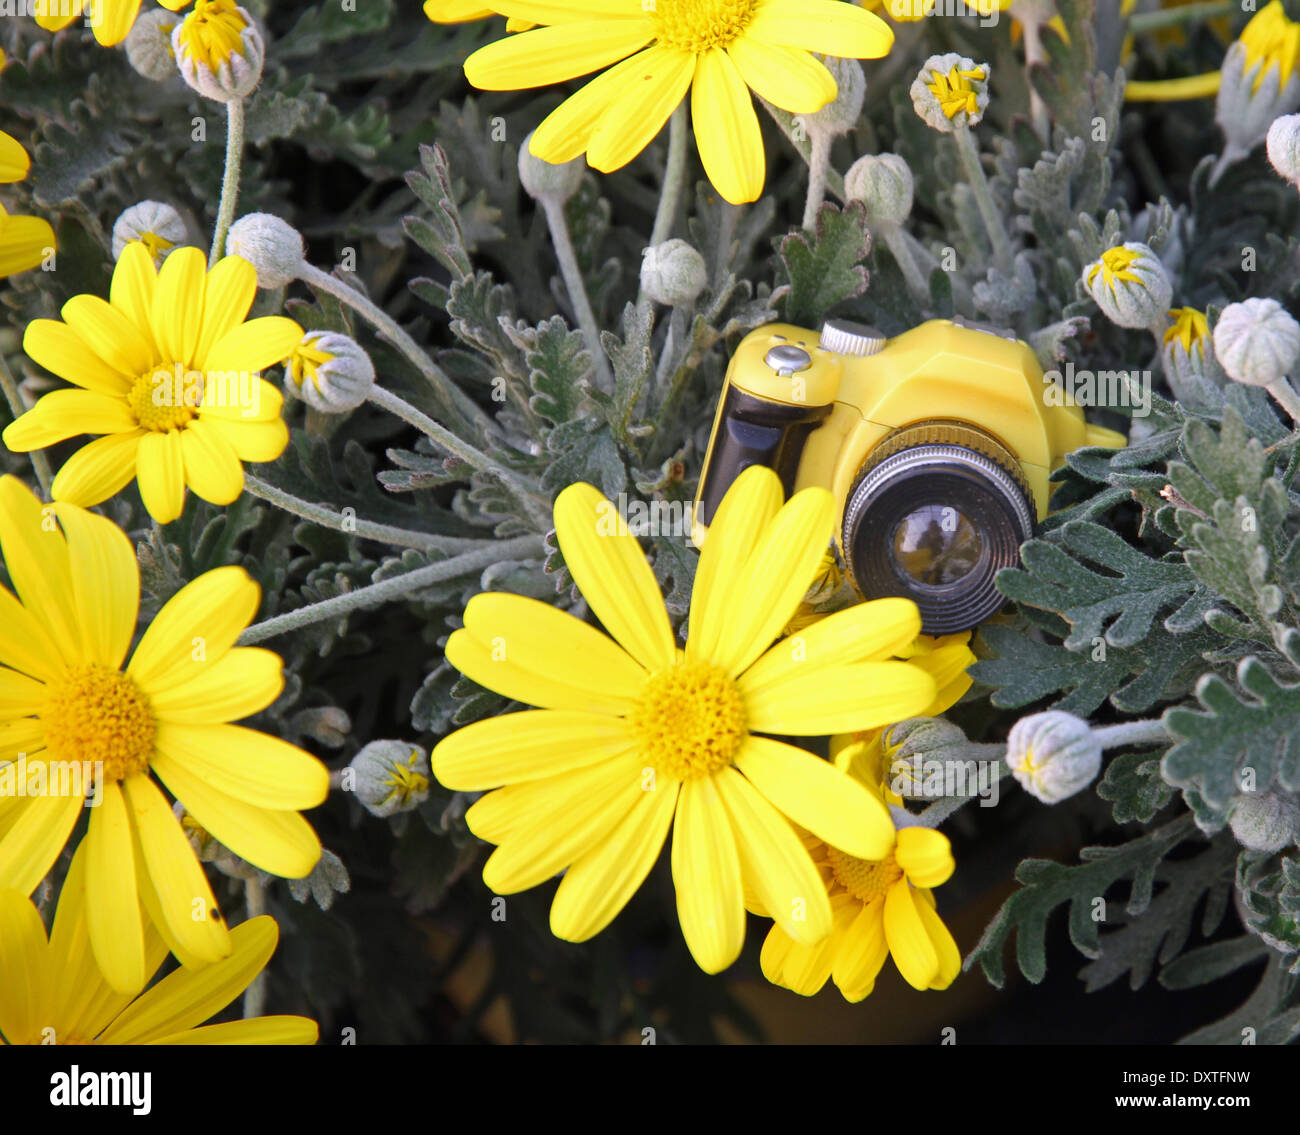 yellow toy camera among the large yellow daisies Stock Photo